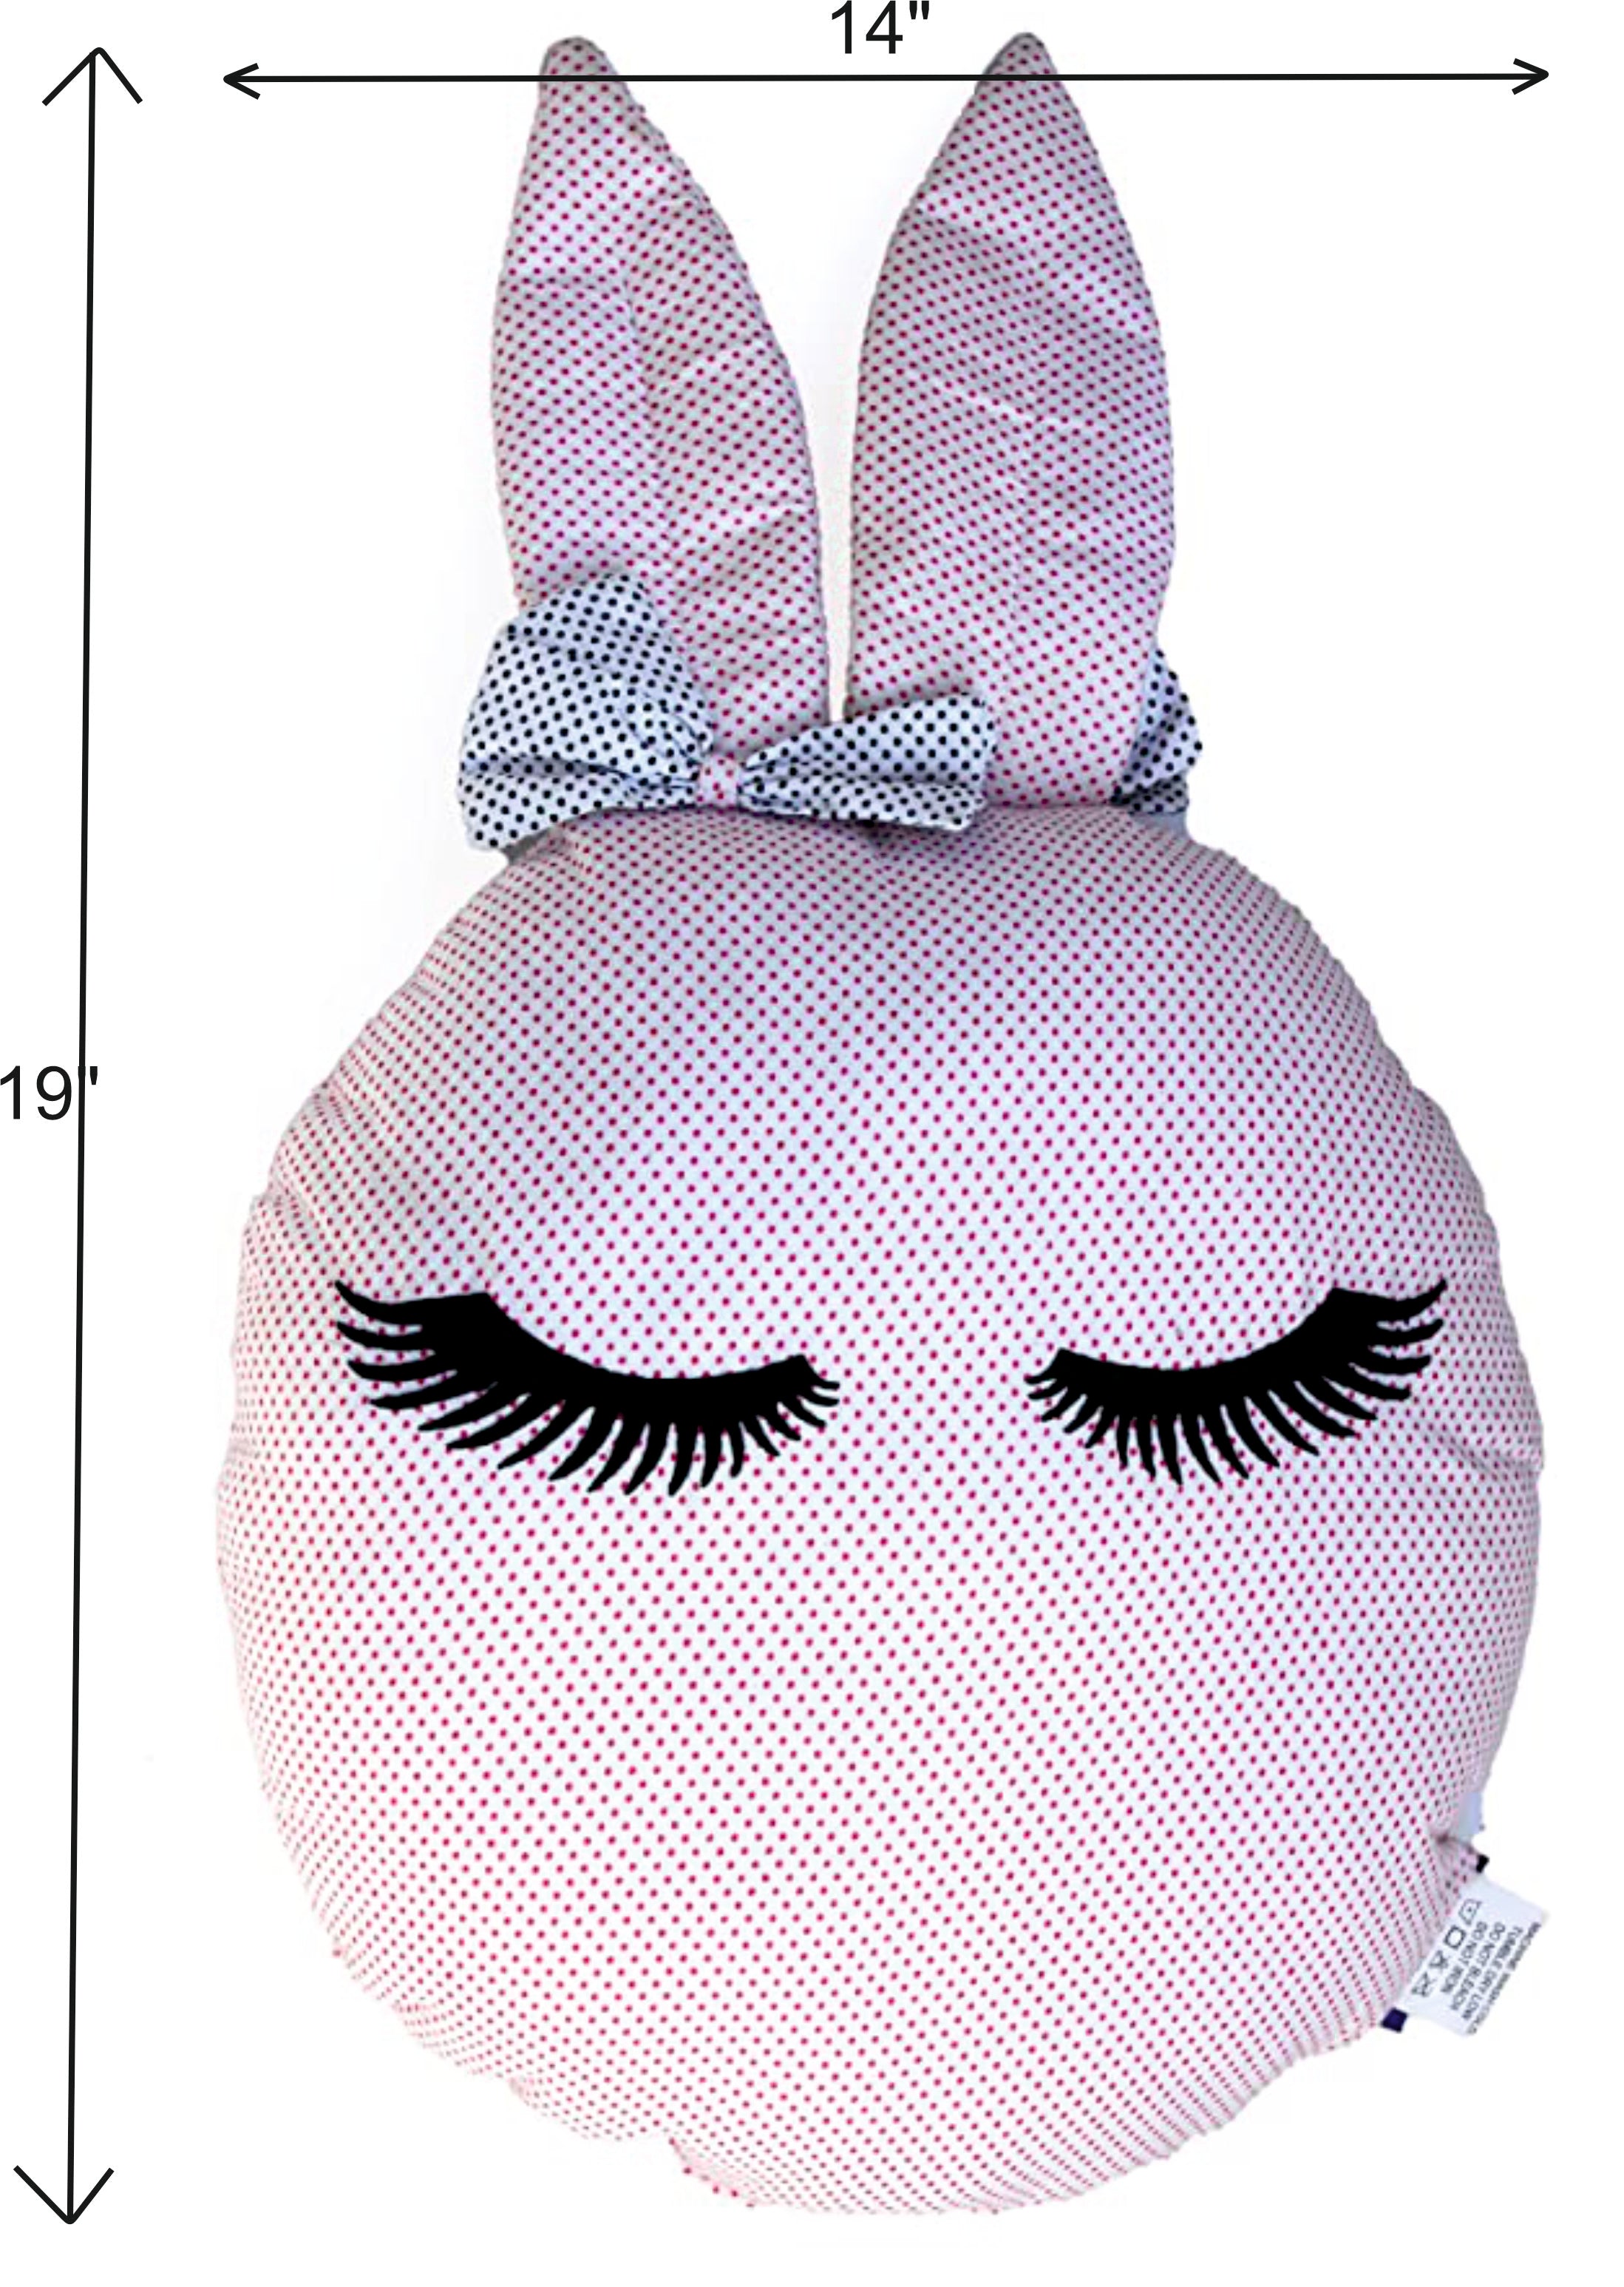 Hase Shaped Pillow